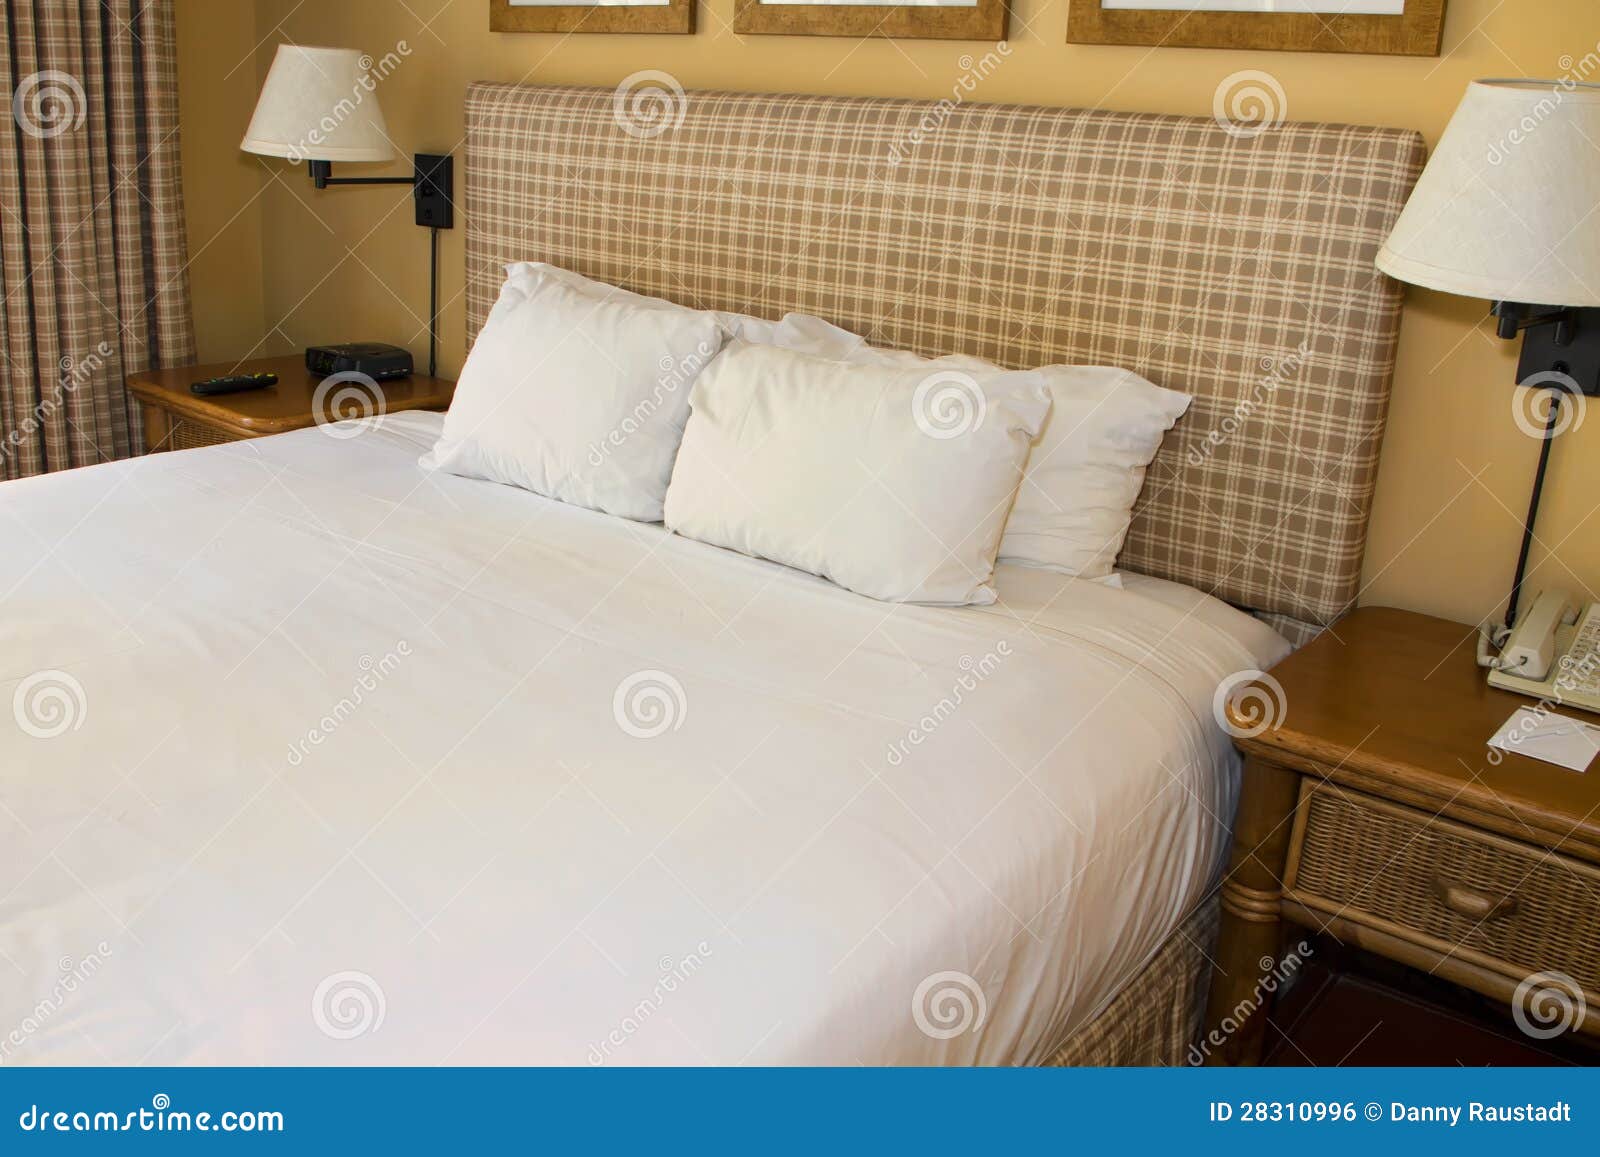 hotel resort bed and white linen